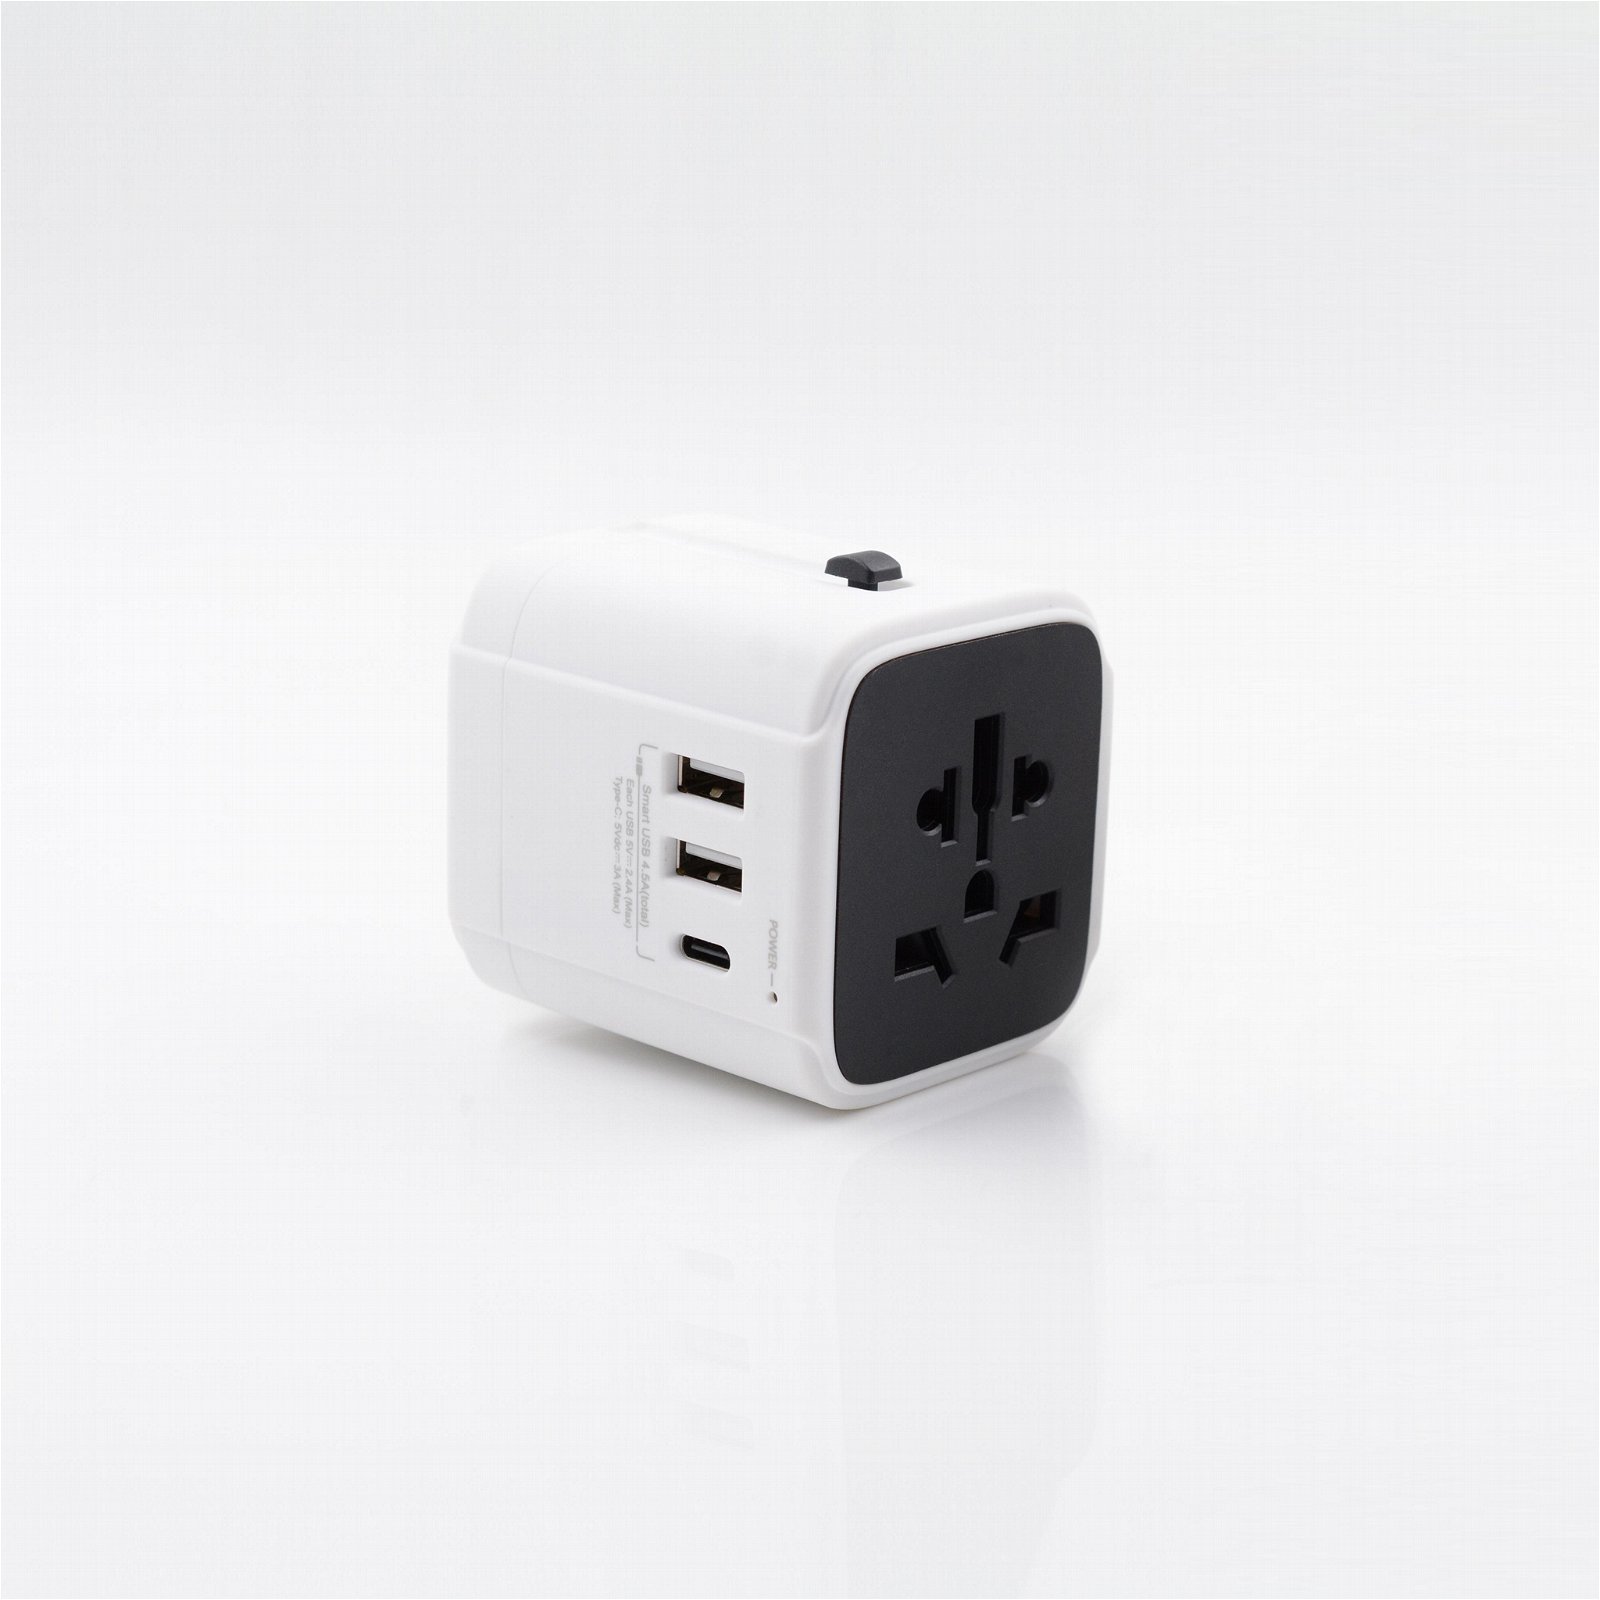 2019 gift promotion travel adapter with Taye C USB 4.5A plug adapter  4